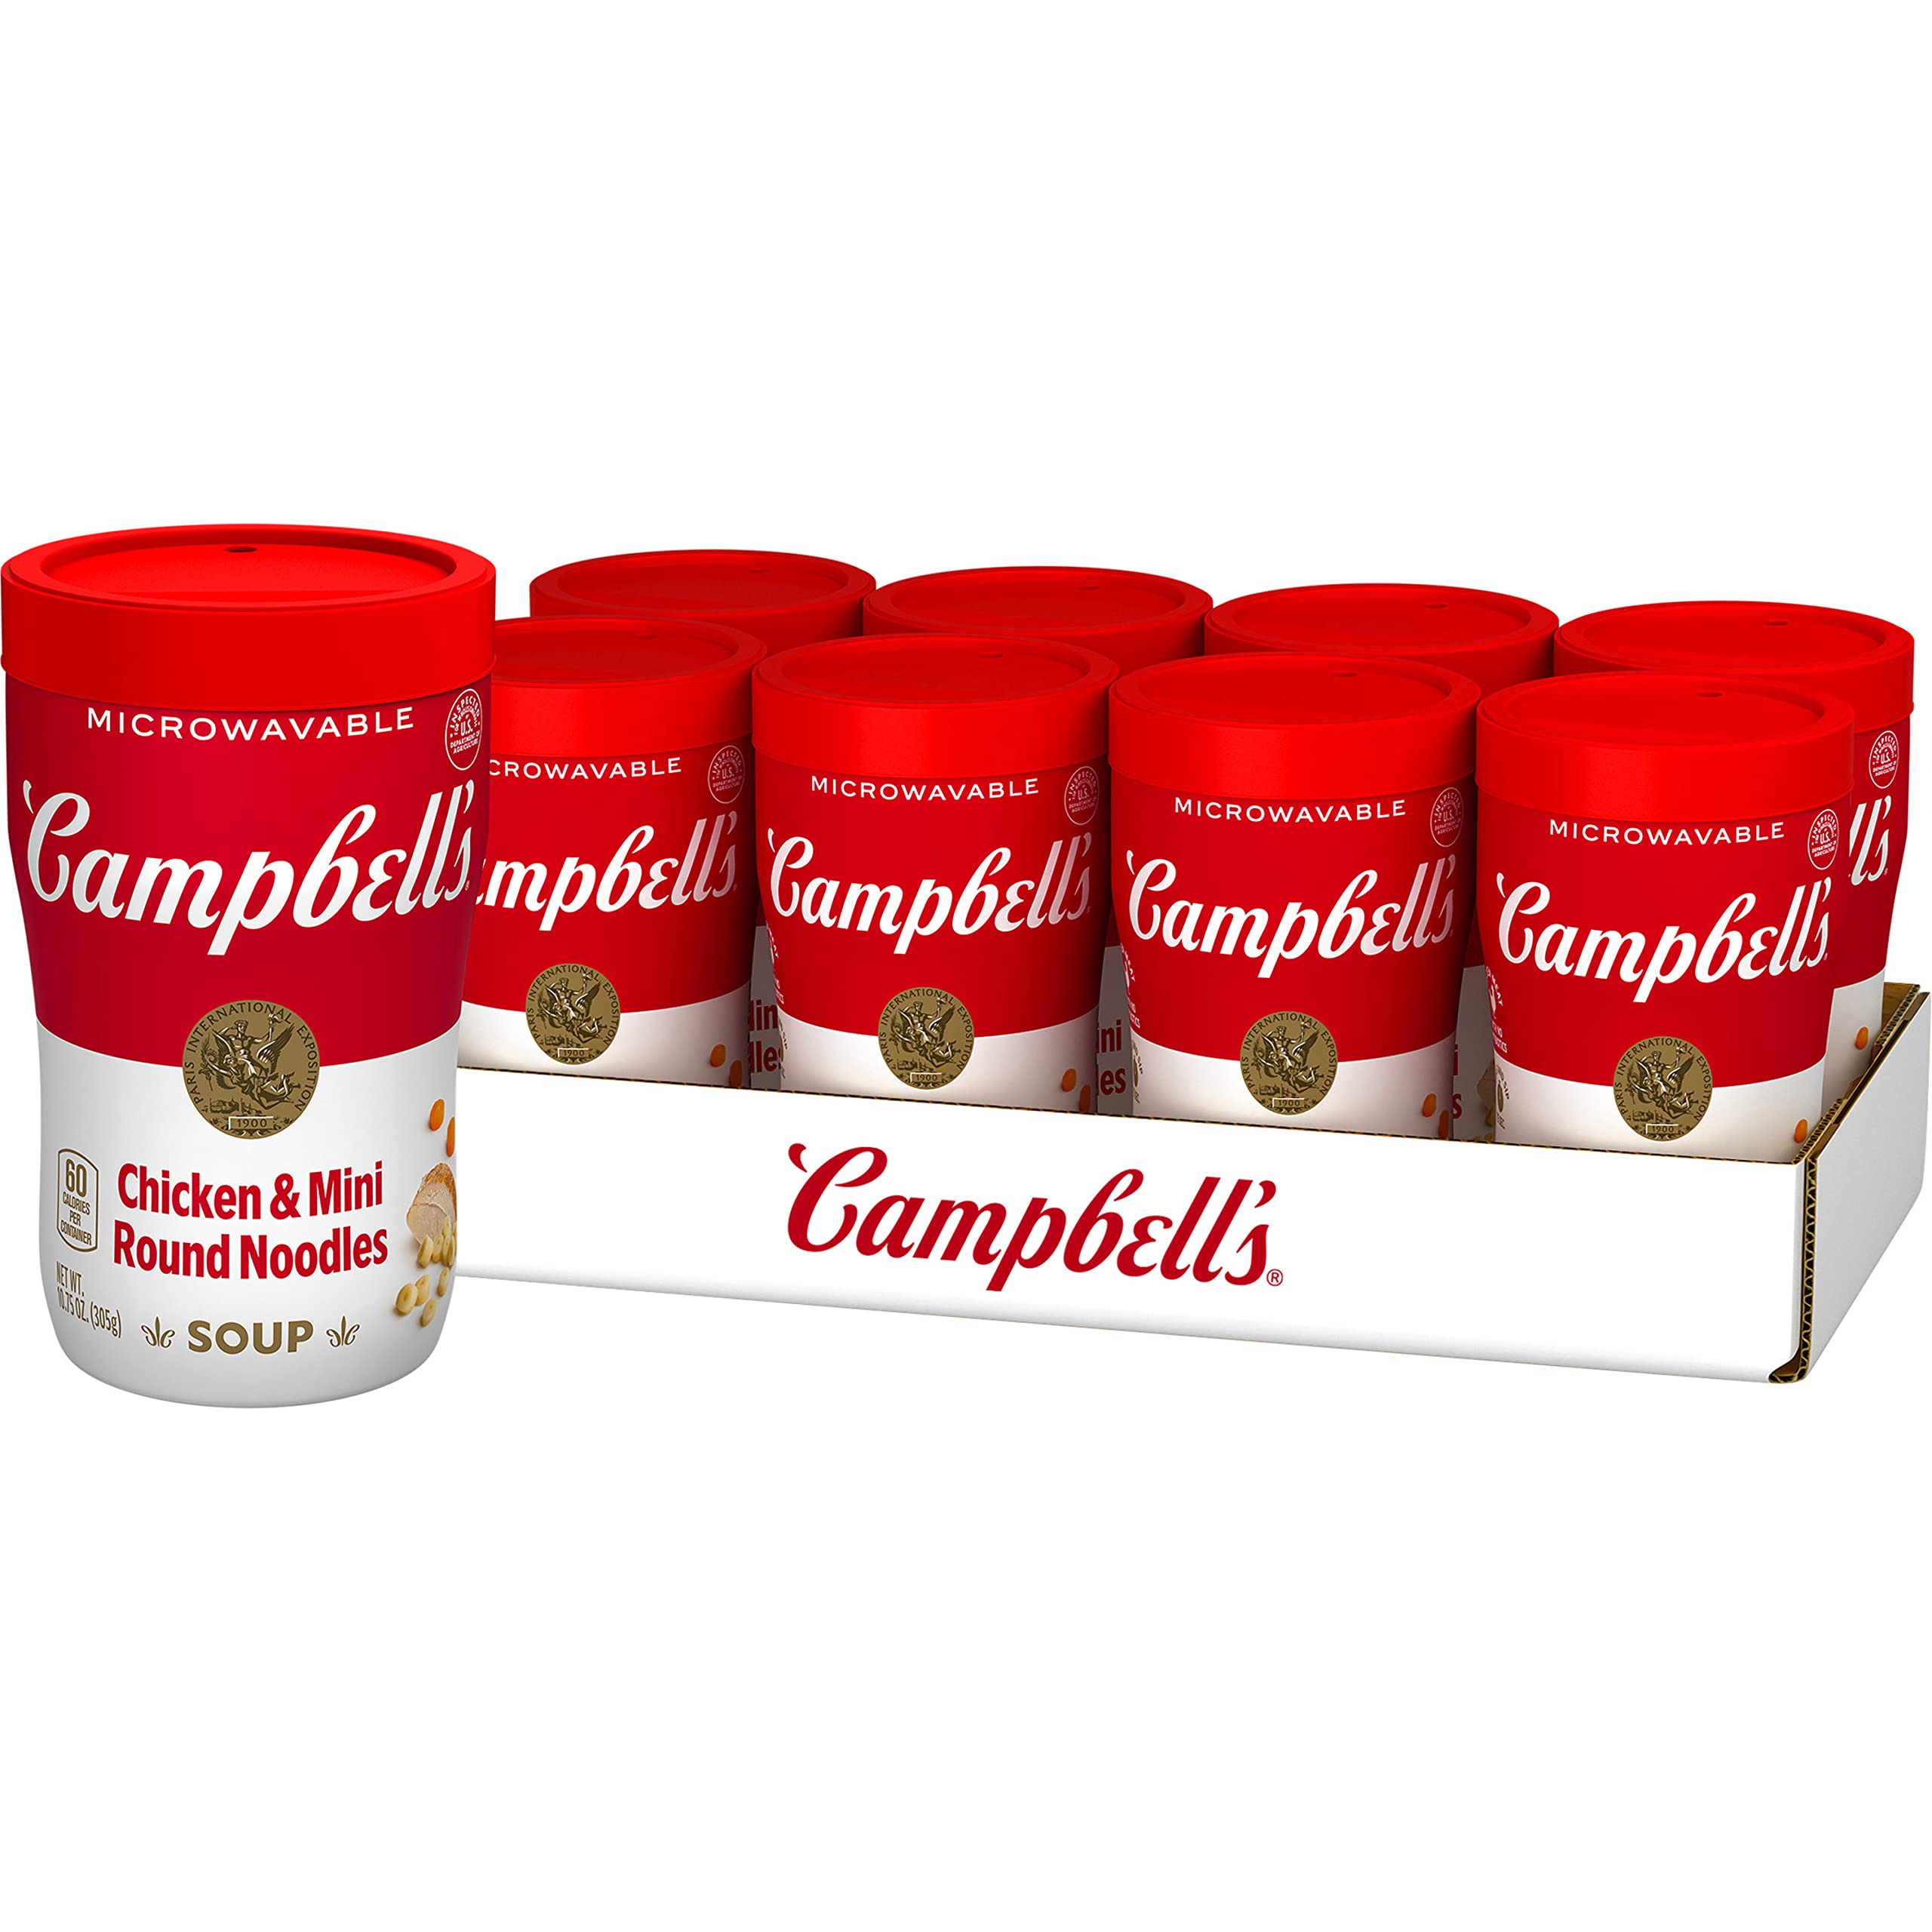 Campbell's Condensed Chicken Noodle Soup, 10.75 Ounce Can 